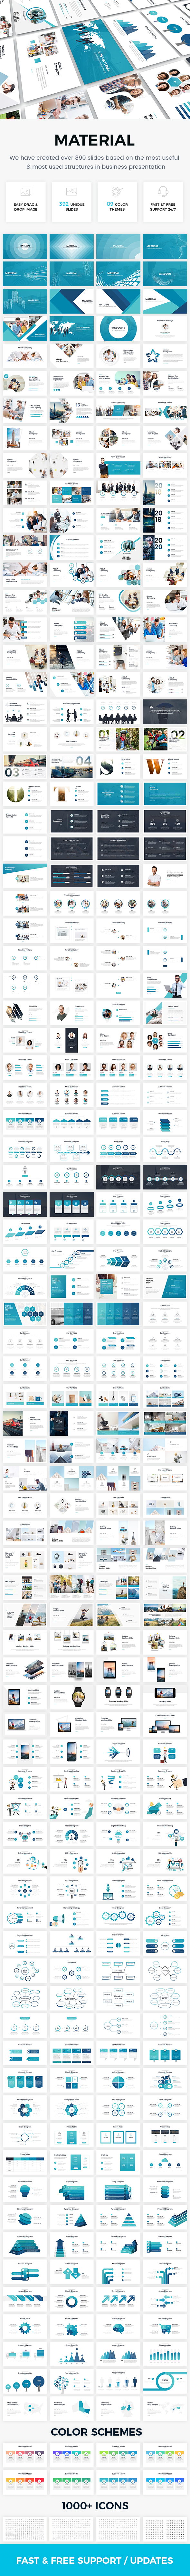 Material - Clean Business Powerpoint Template 2019